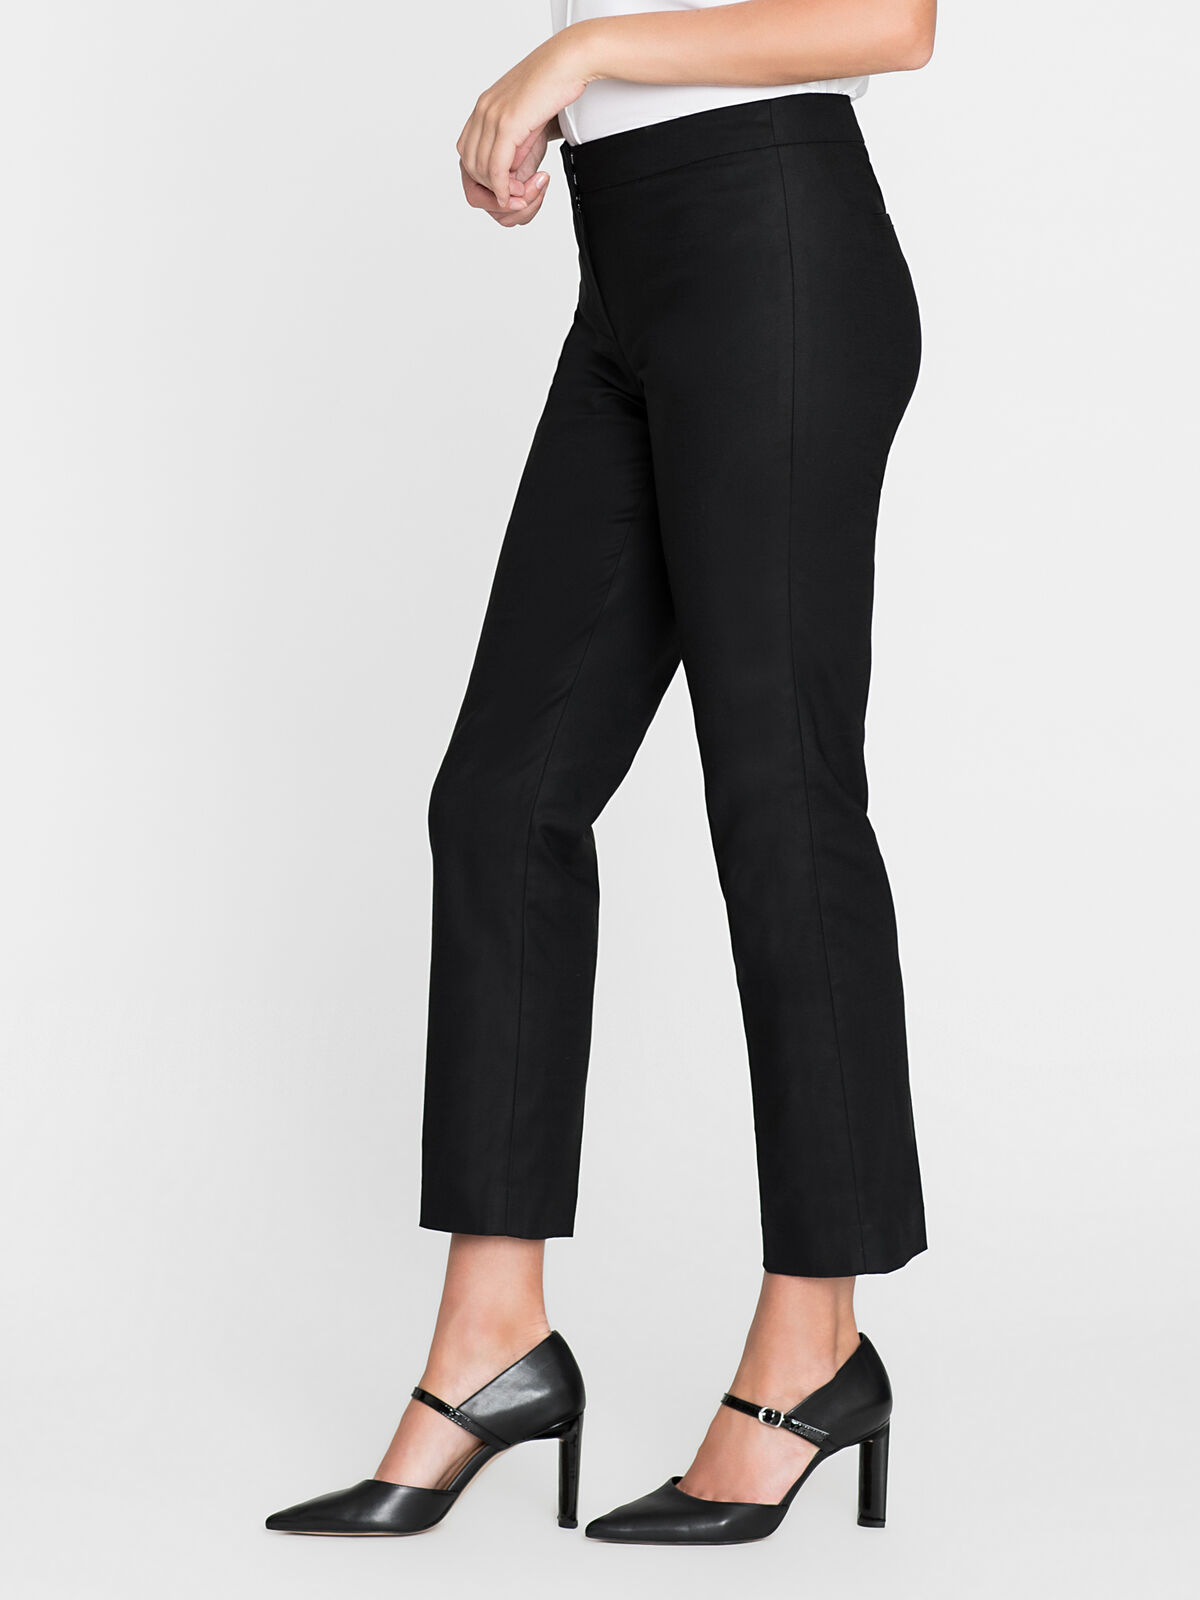 Perfect Pant Front Zip Ankle